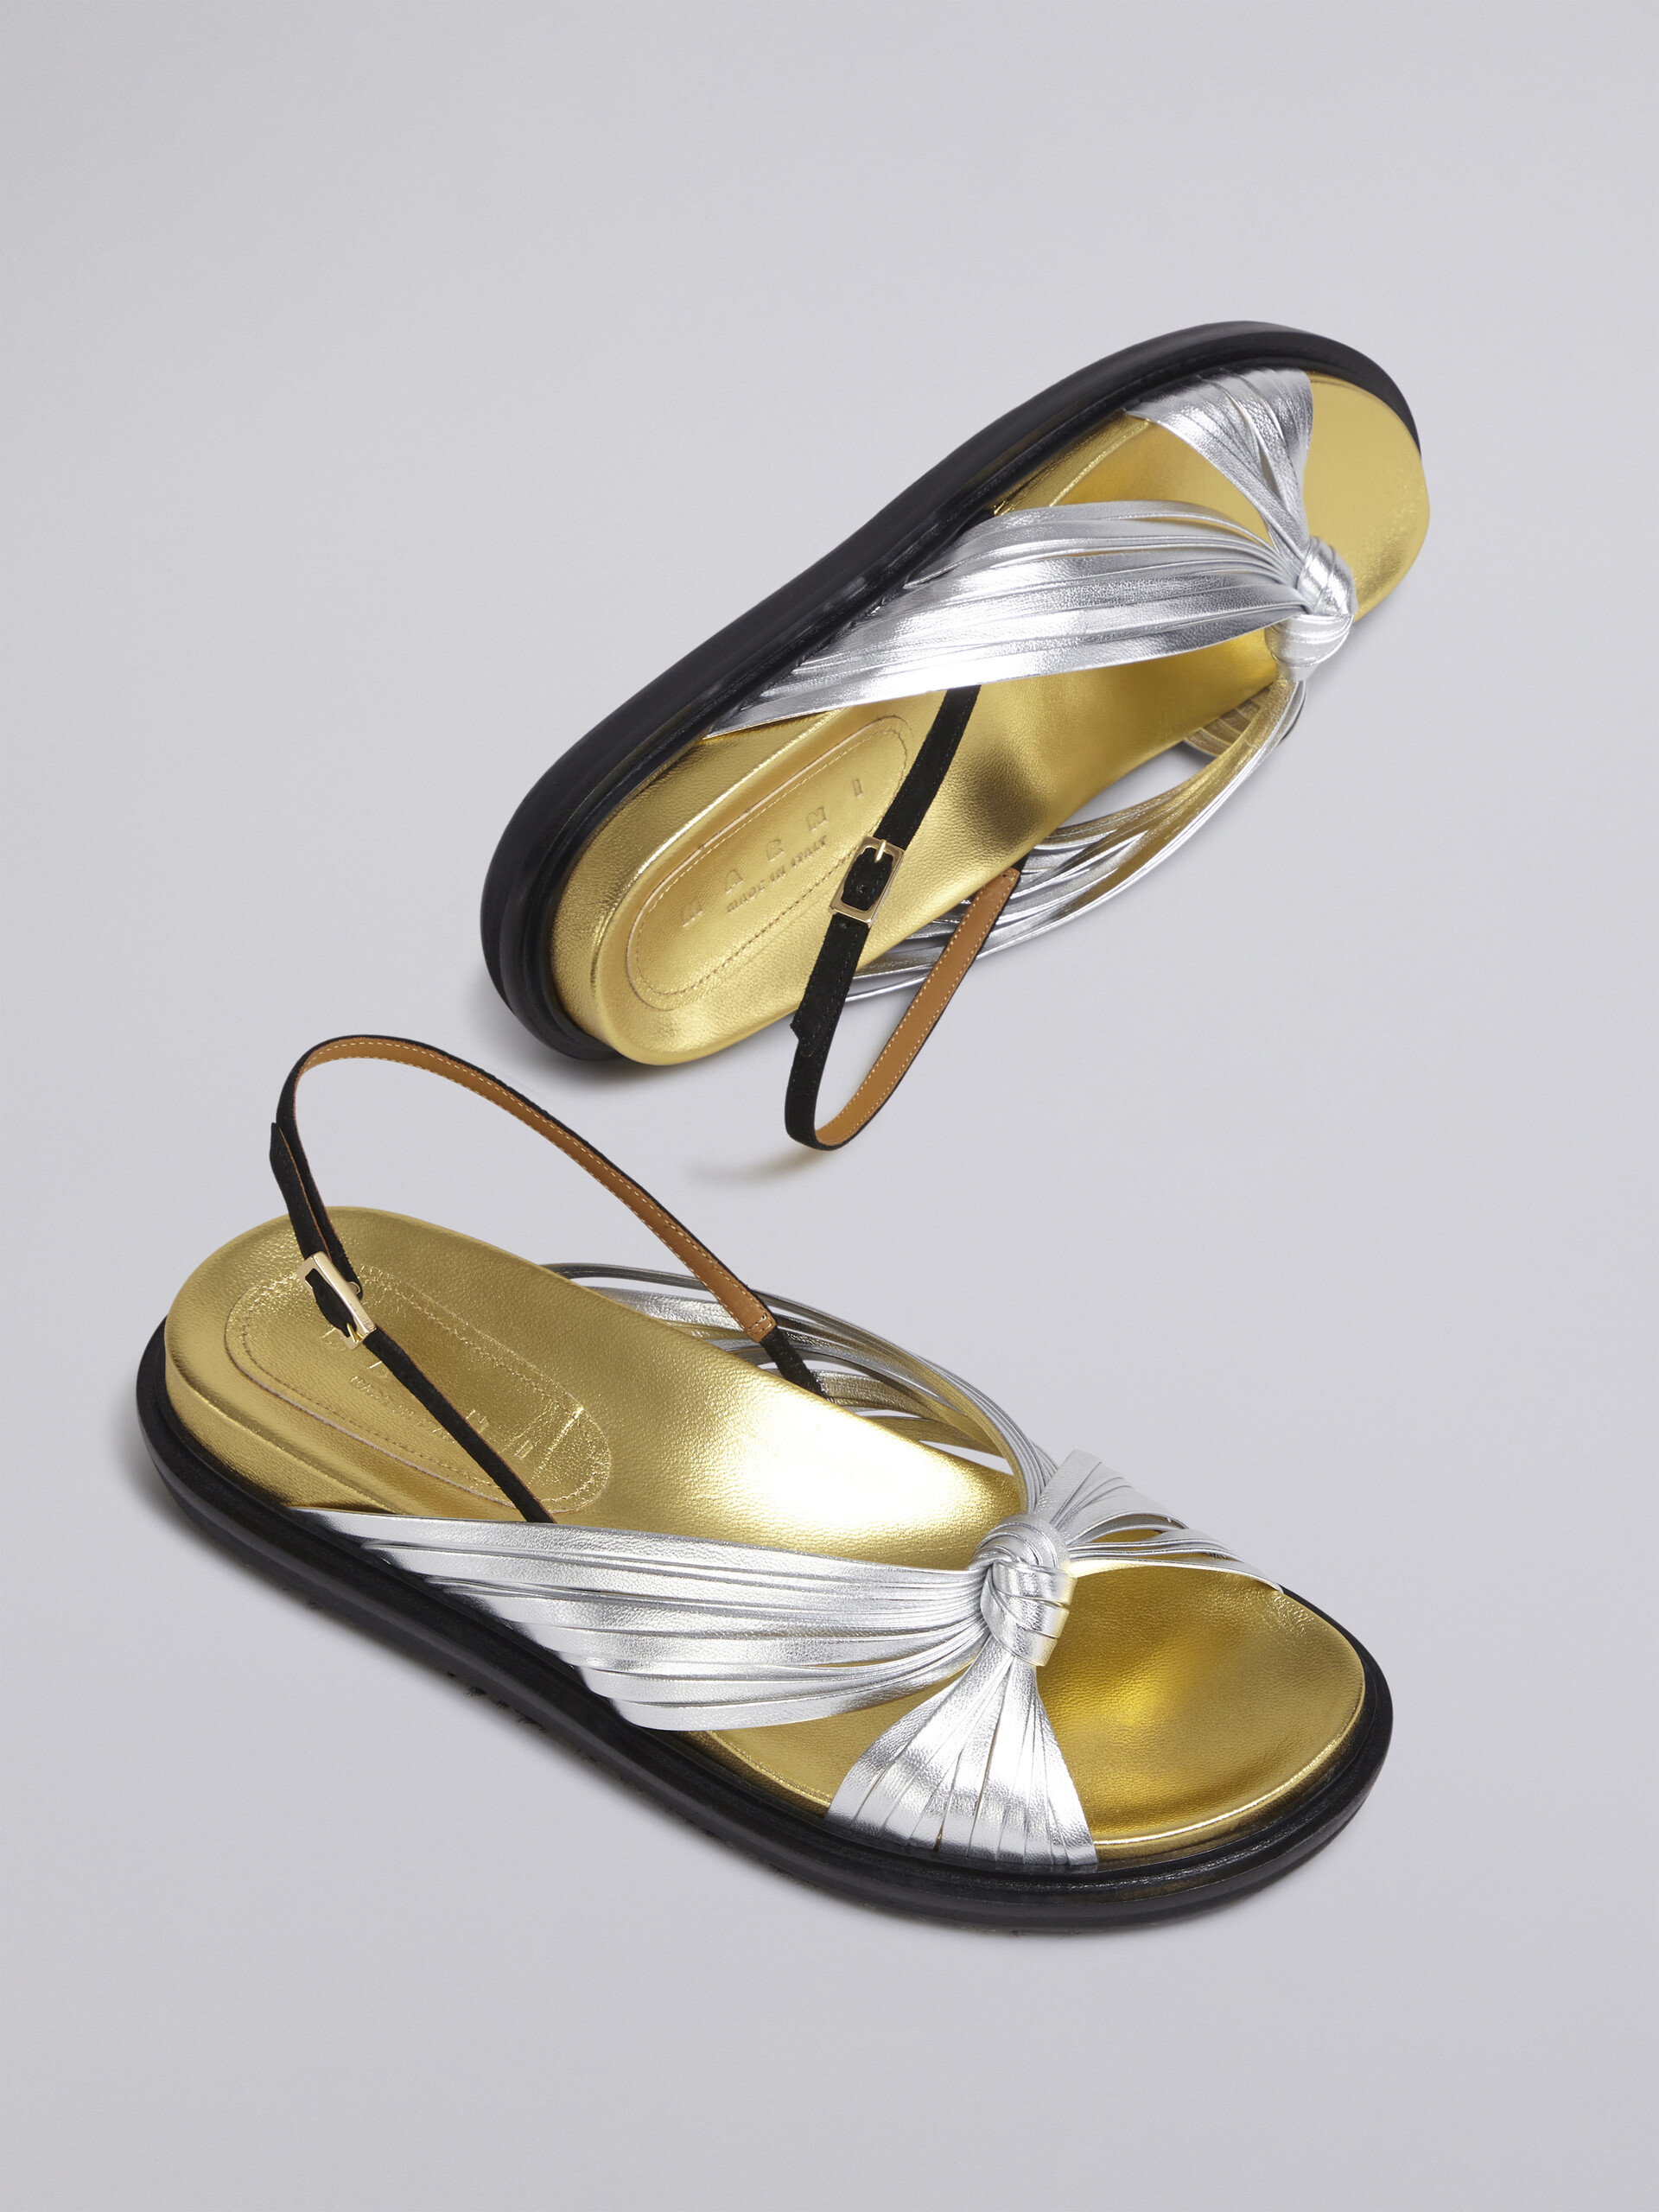 Silver laminated leather Fussbett - Sandals - Image 5